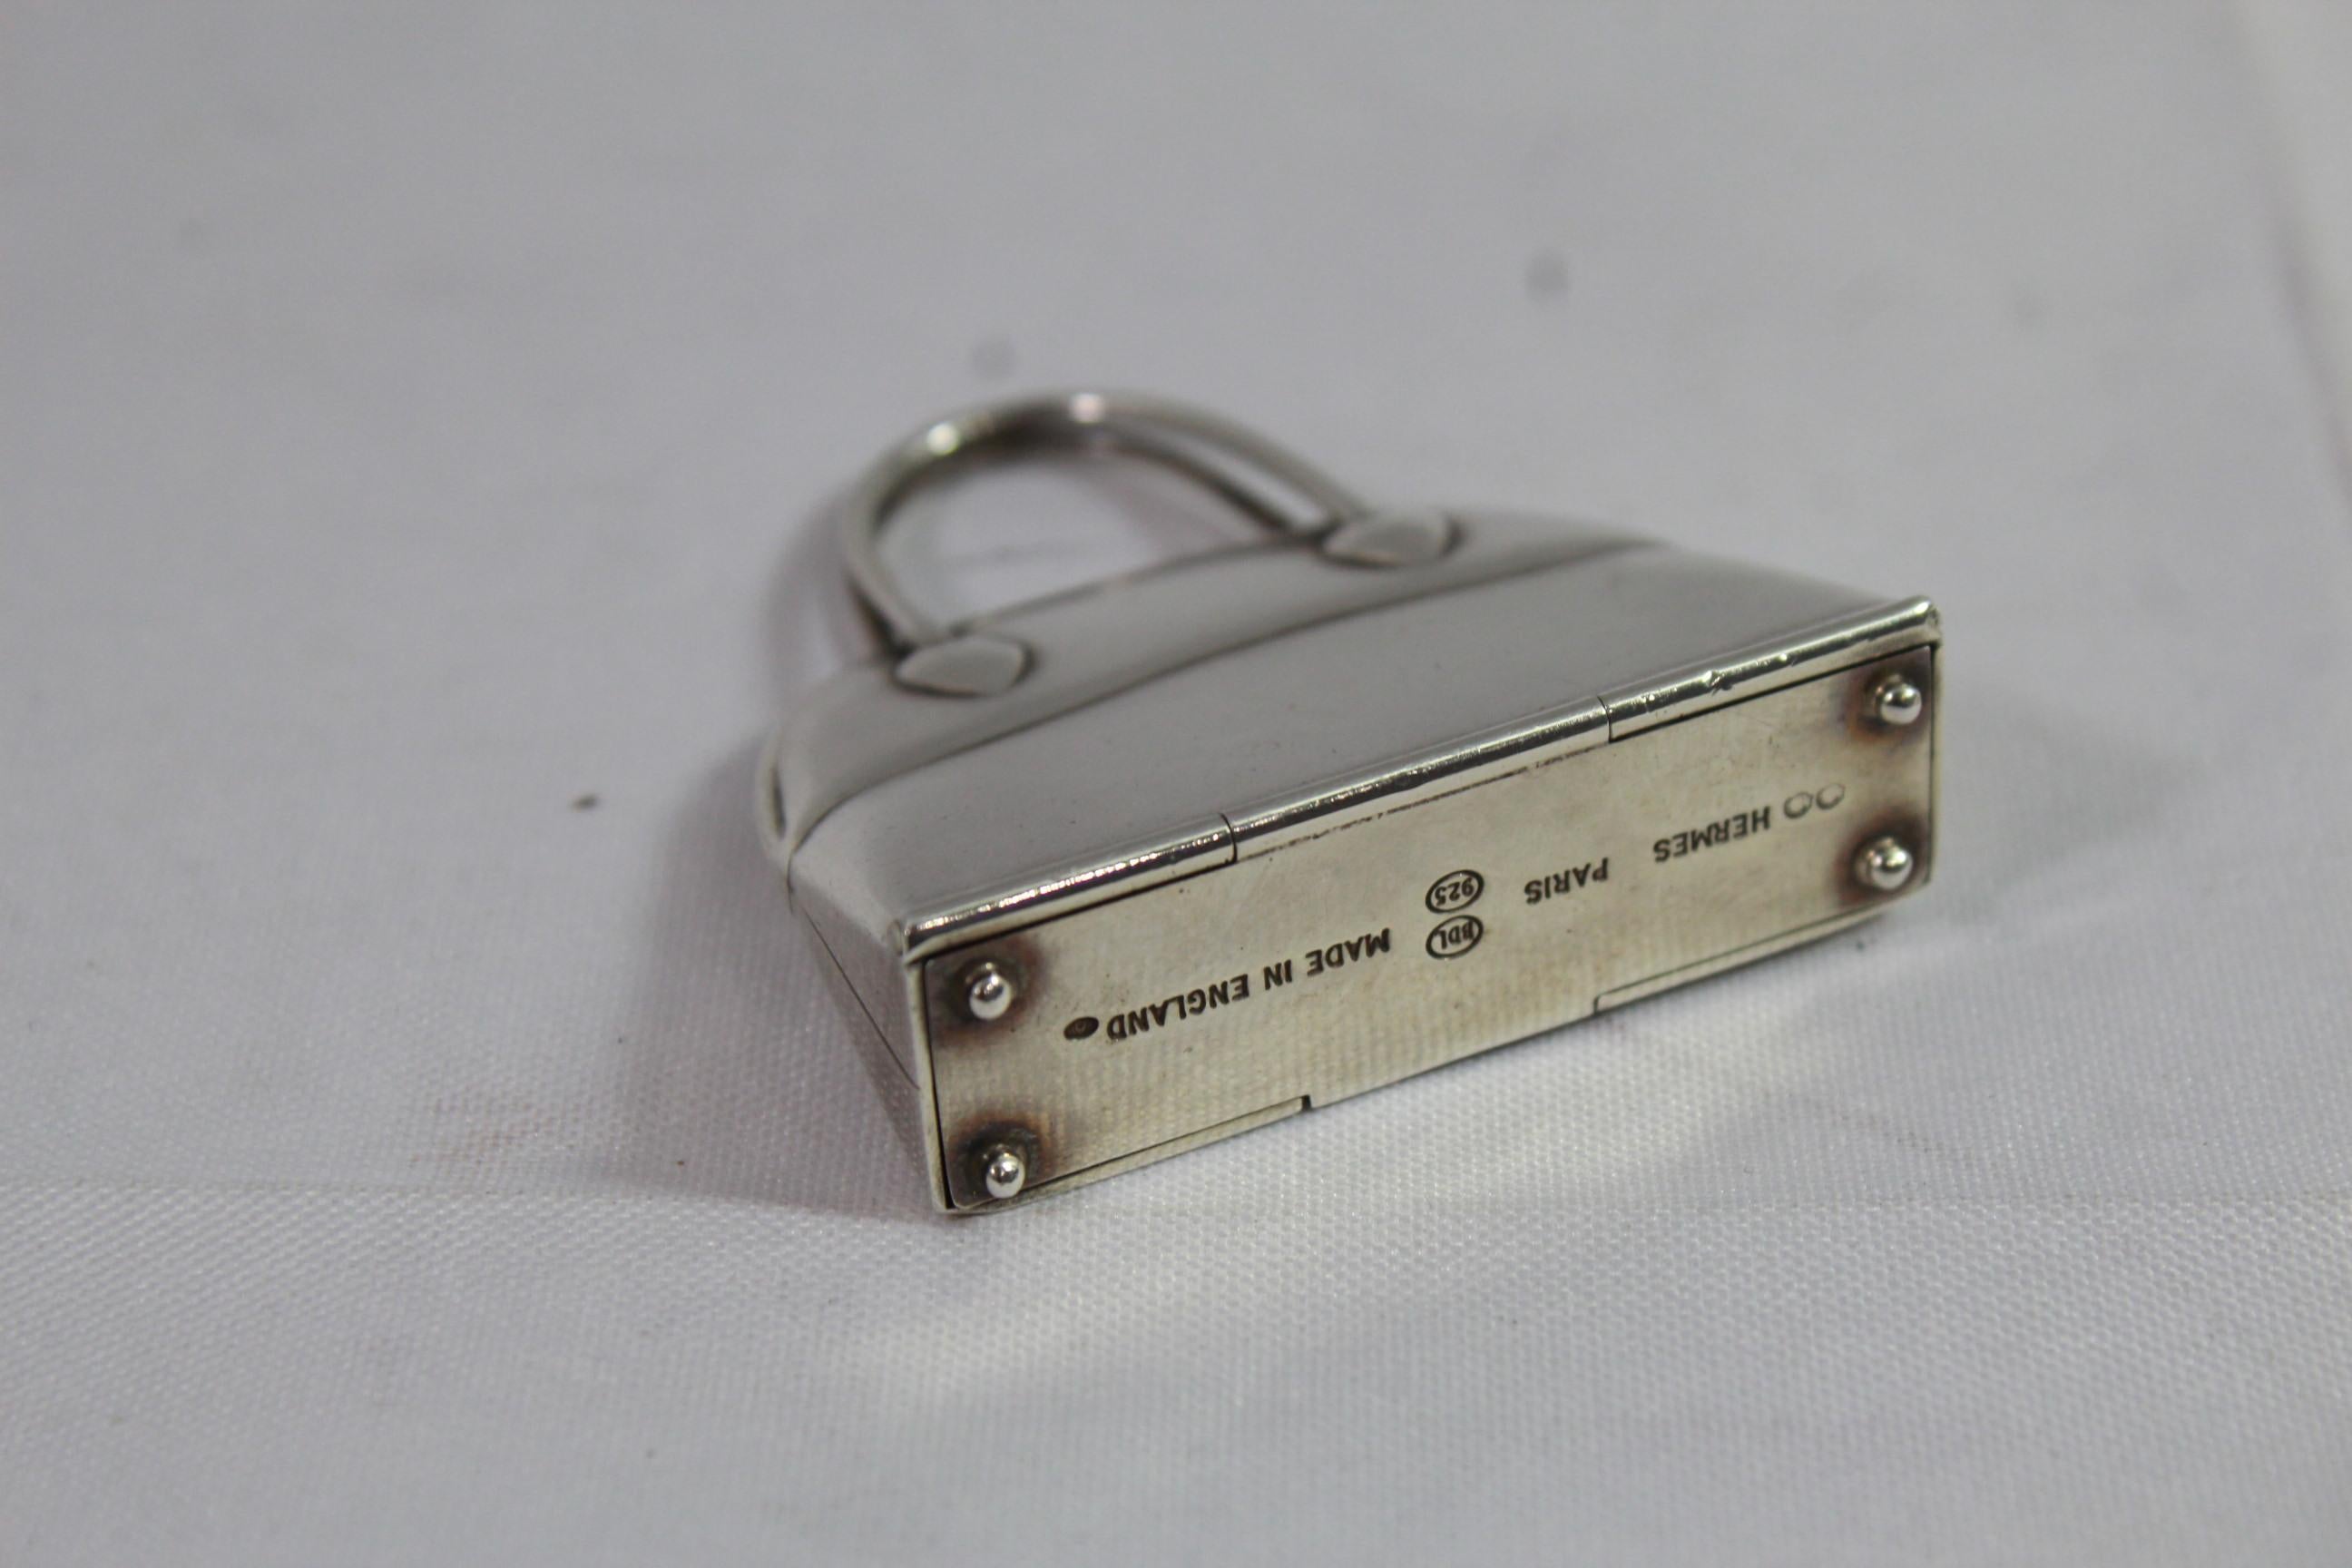 Hermes Bolid pill box in sterling silver.
Size 4.5*4.7 cm
Good viintage condition.
Signes in the bottom
